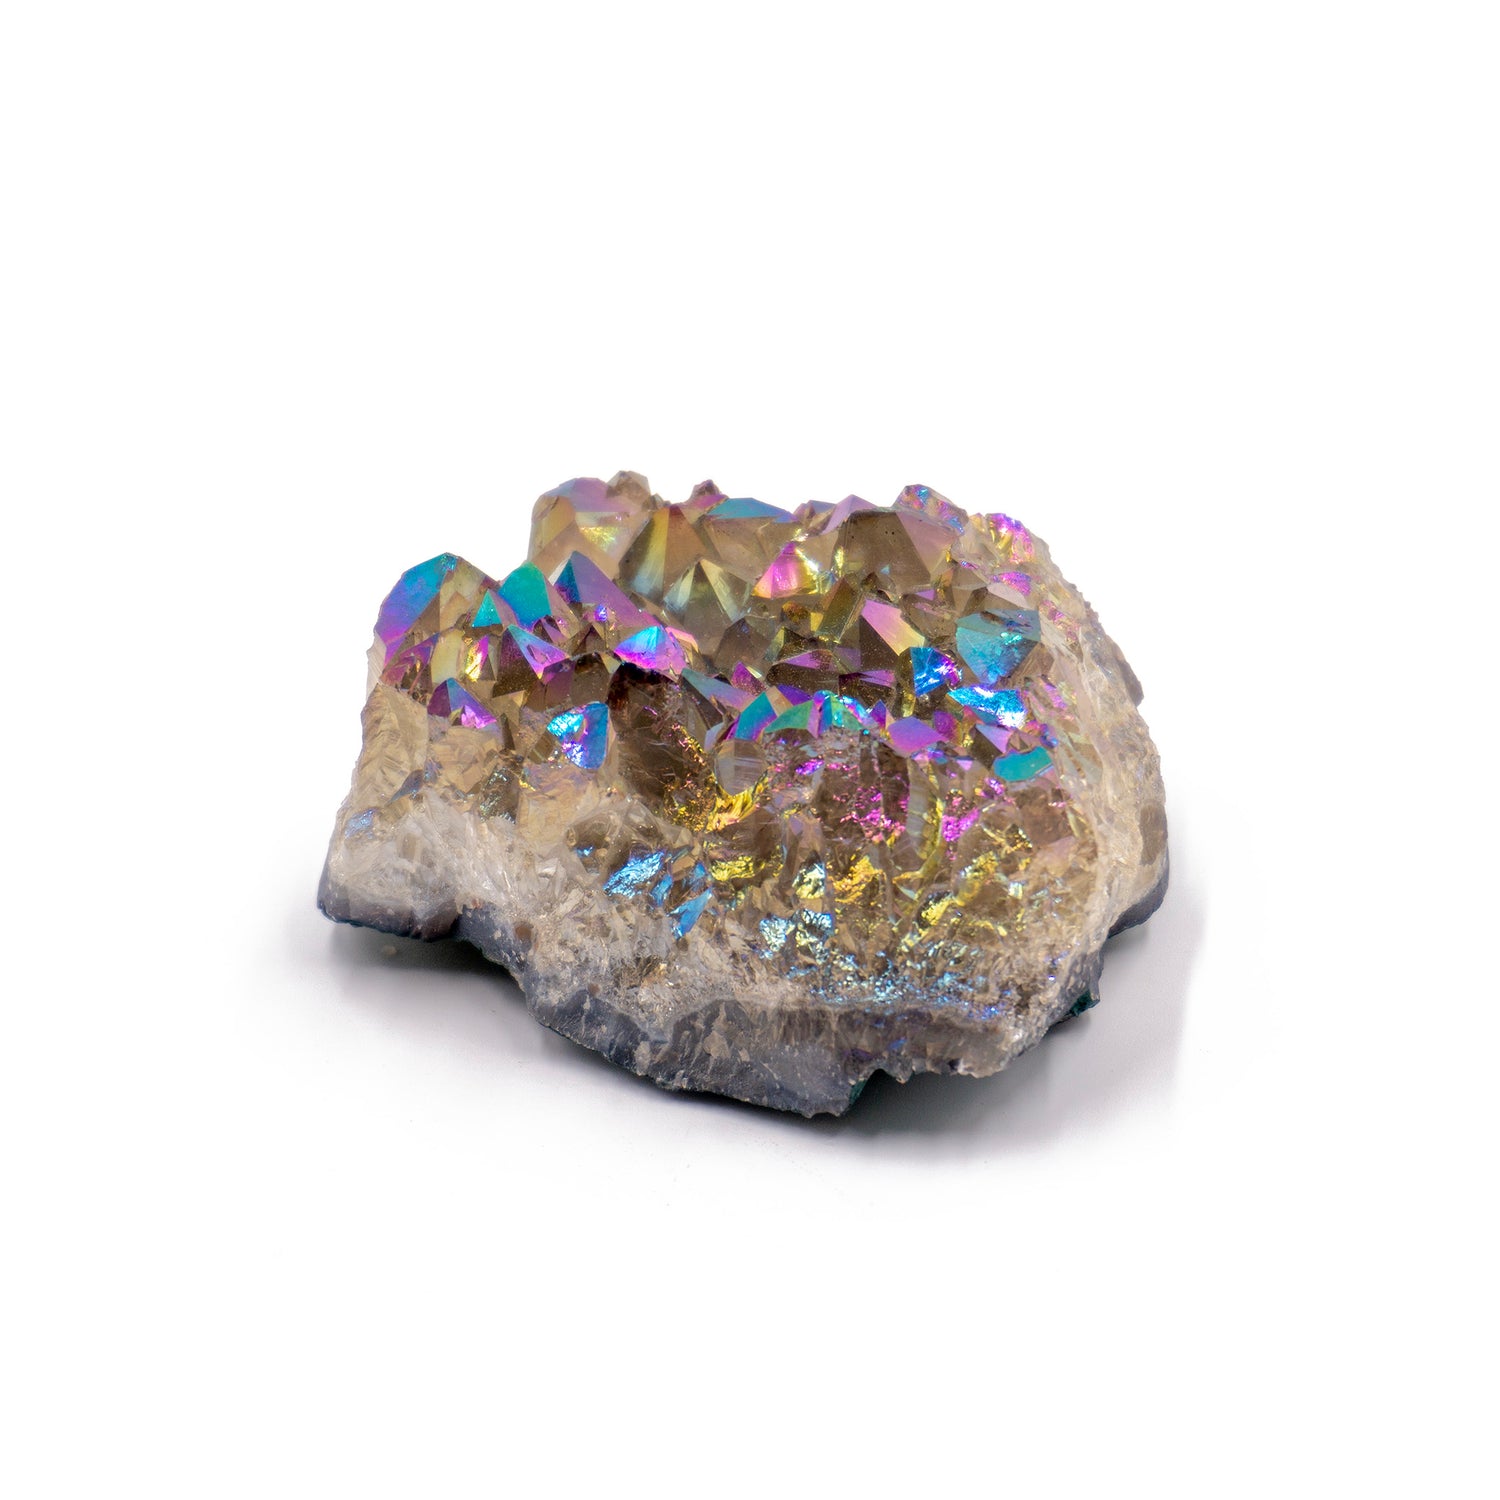 cluster of rainbow crystals growing on a gray stone